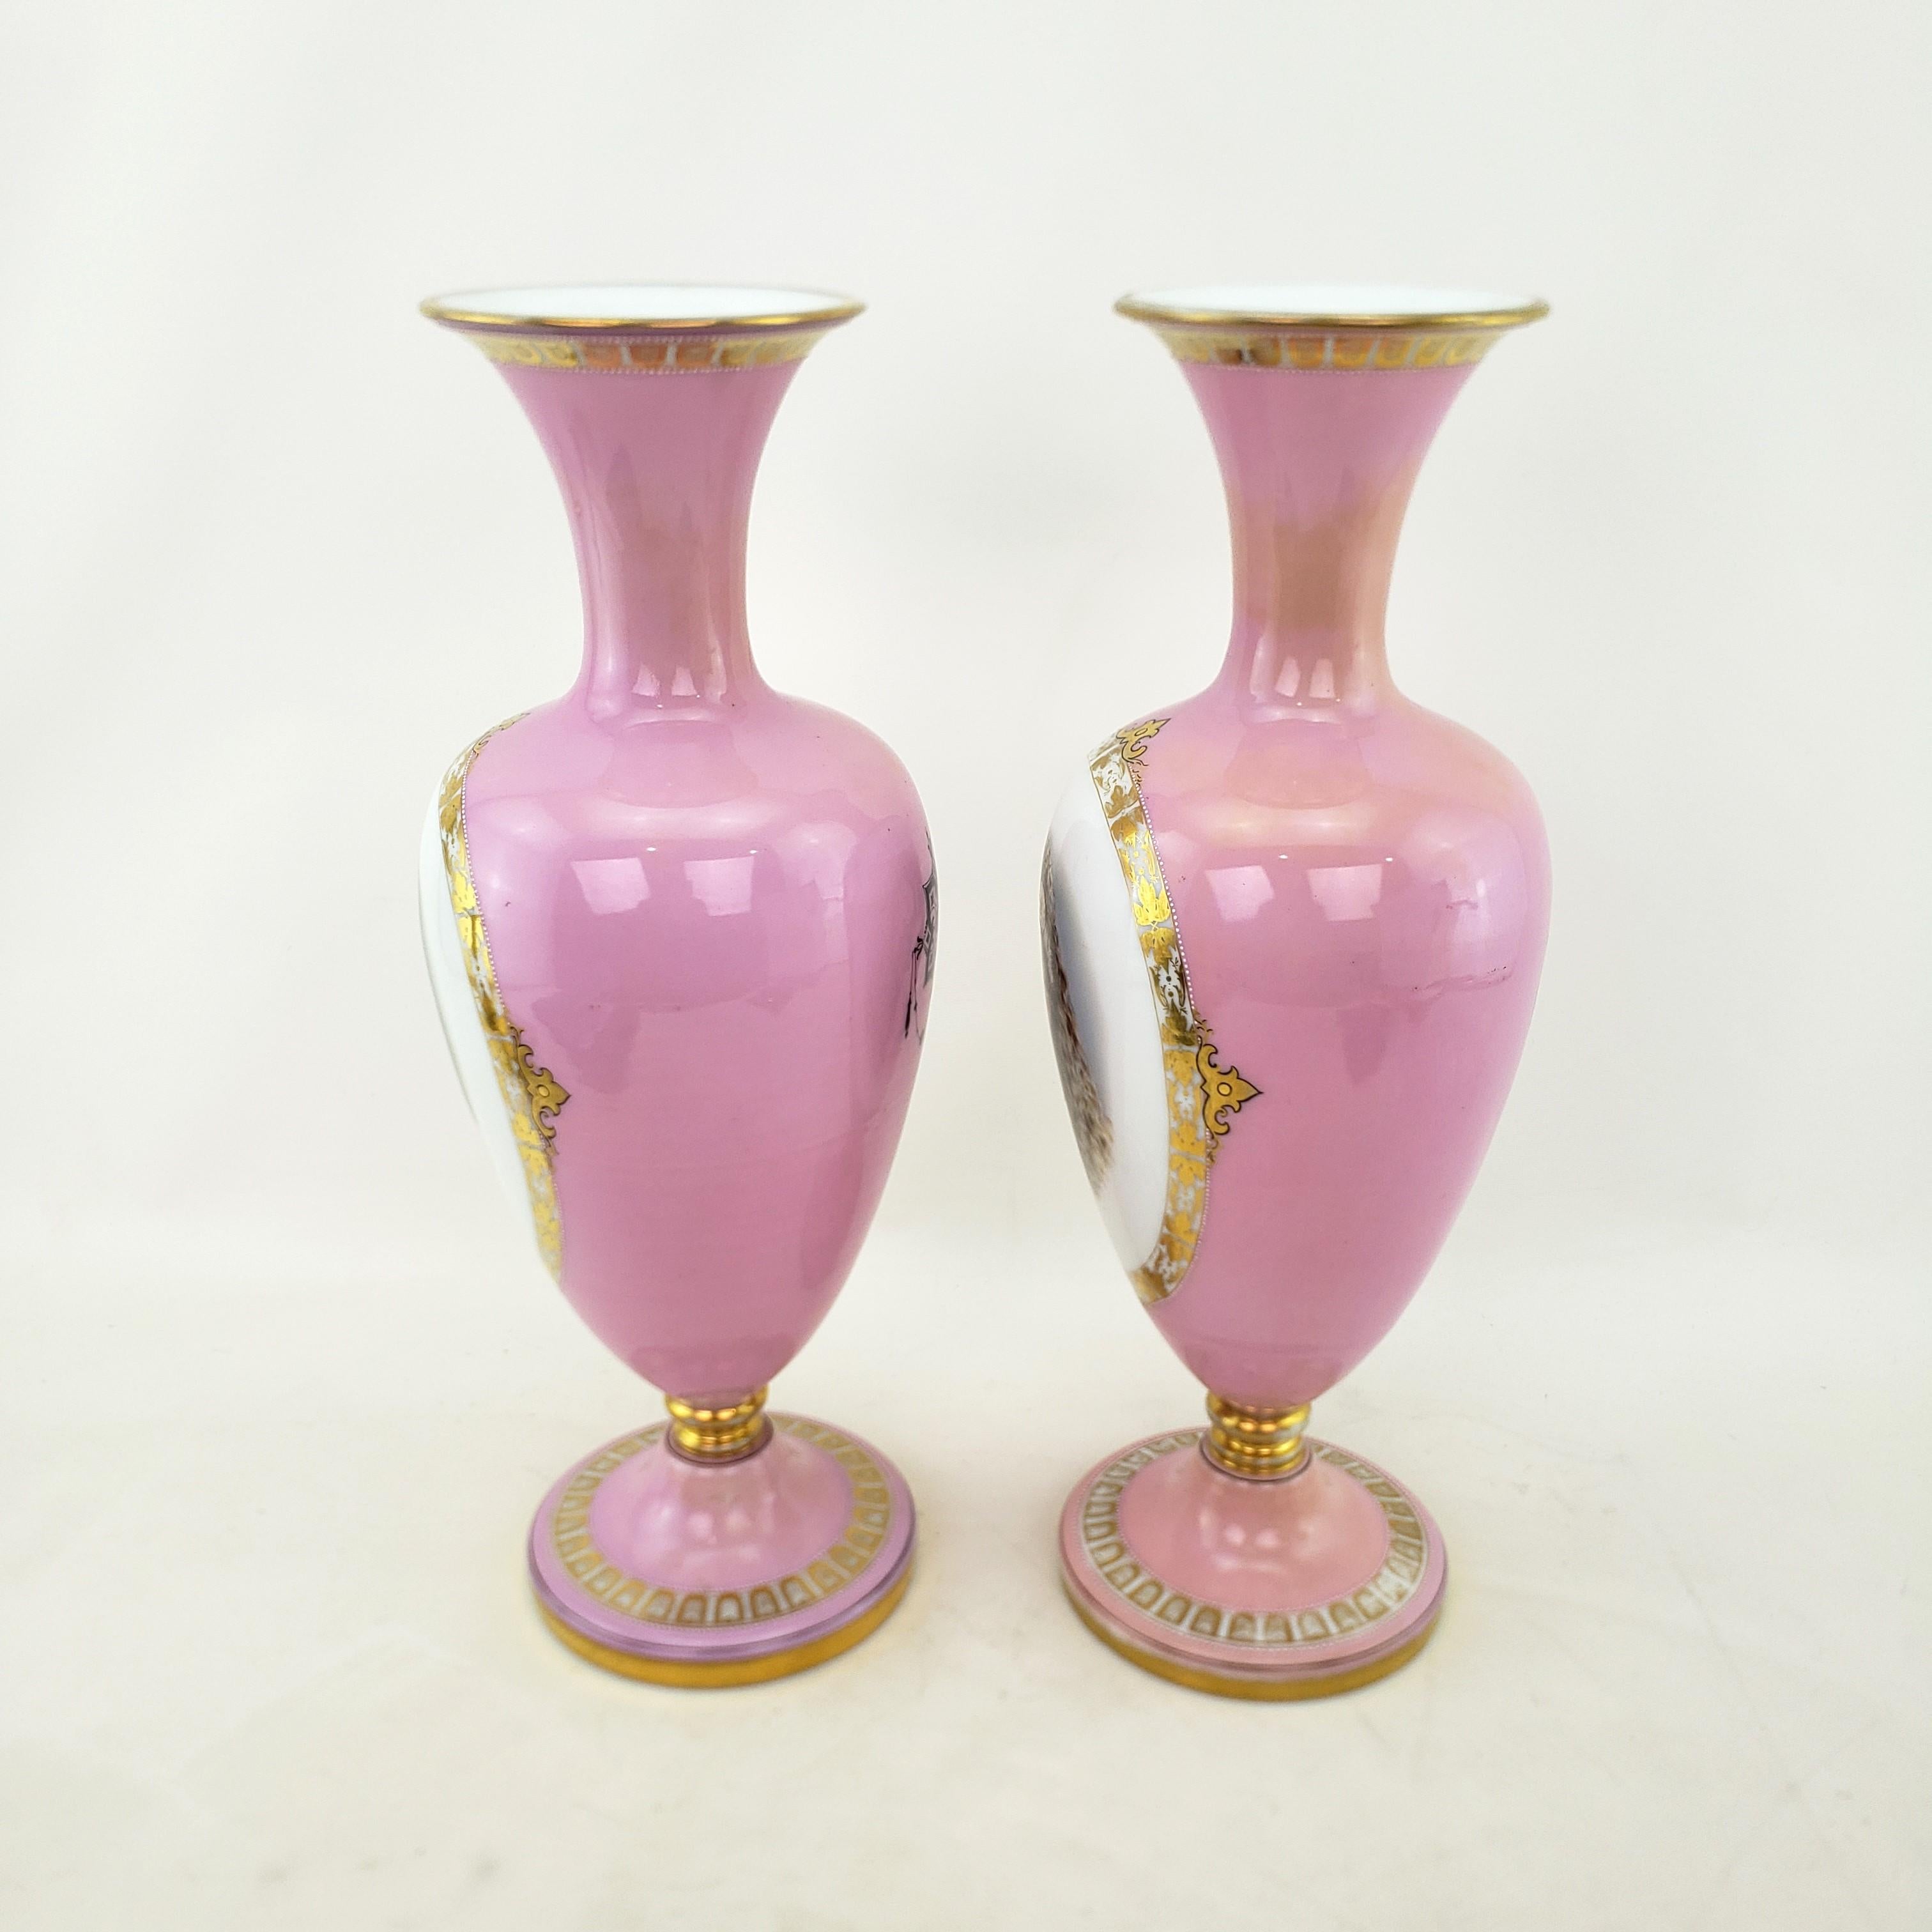 Pair of Large Antique Pink Enameled Glass Portrait Vases with Gilt Accents In Good Condition For Sale In Hamilton, Ontario